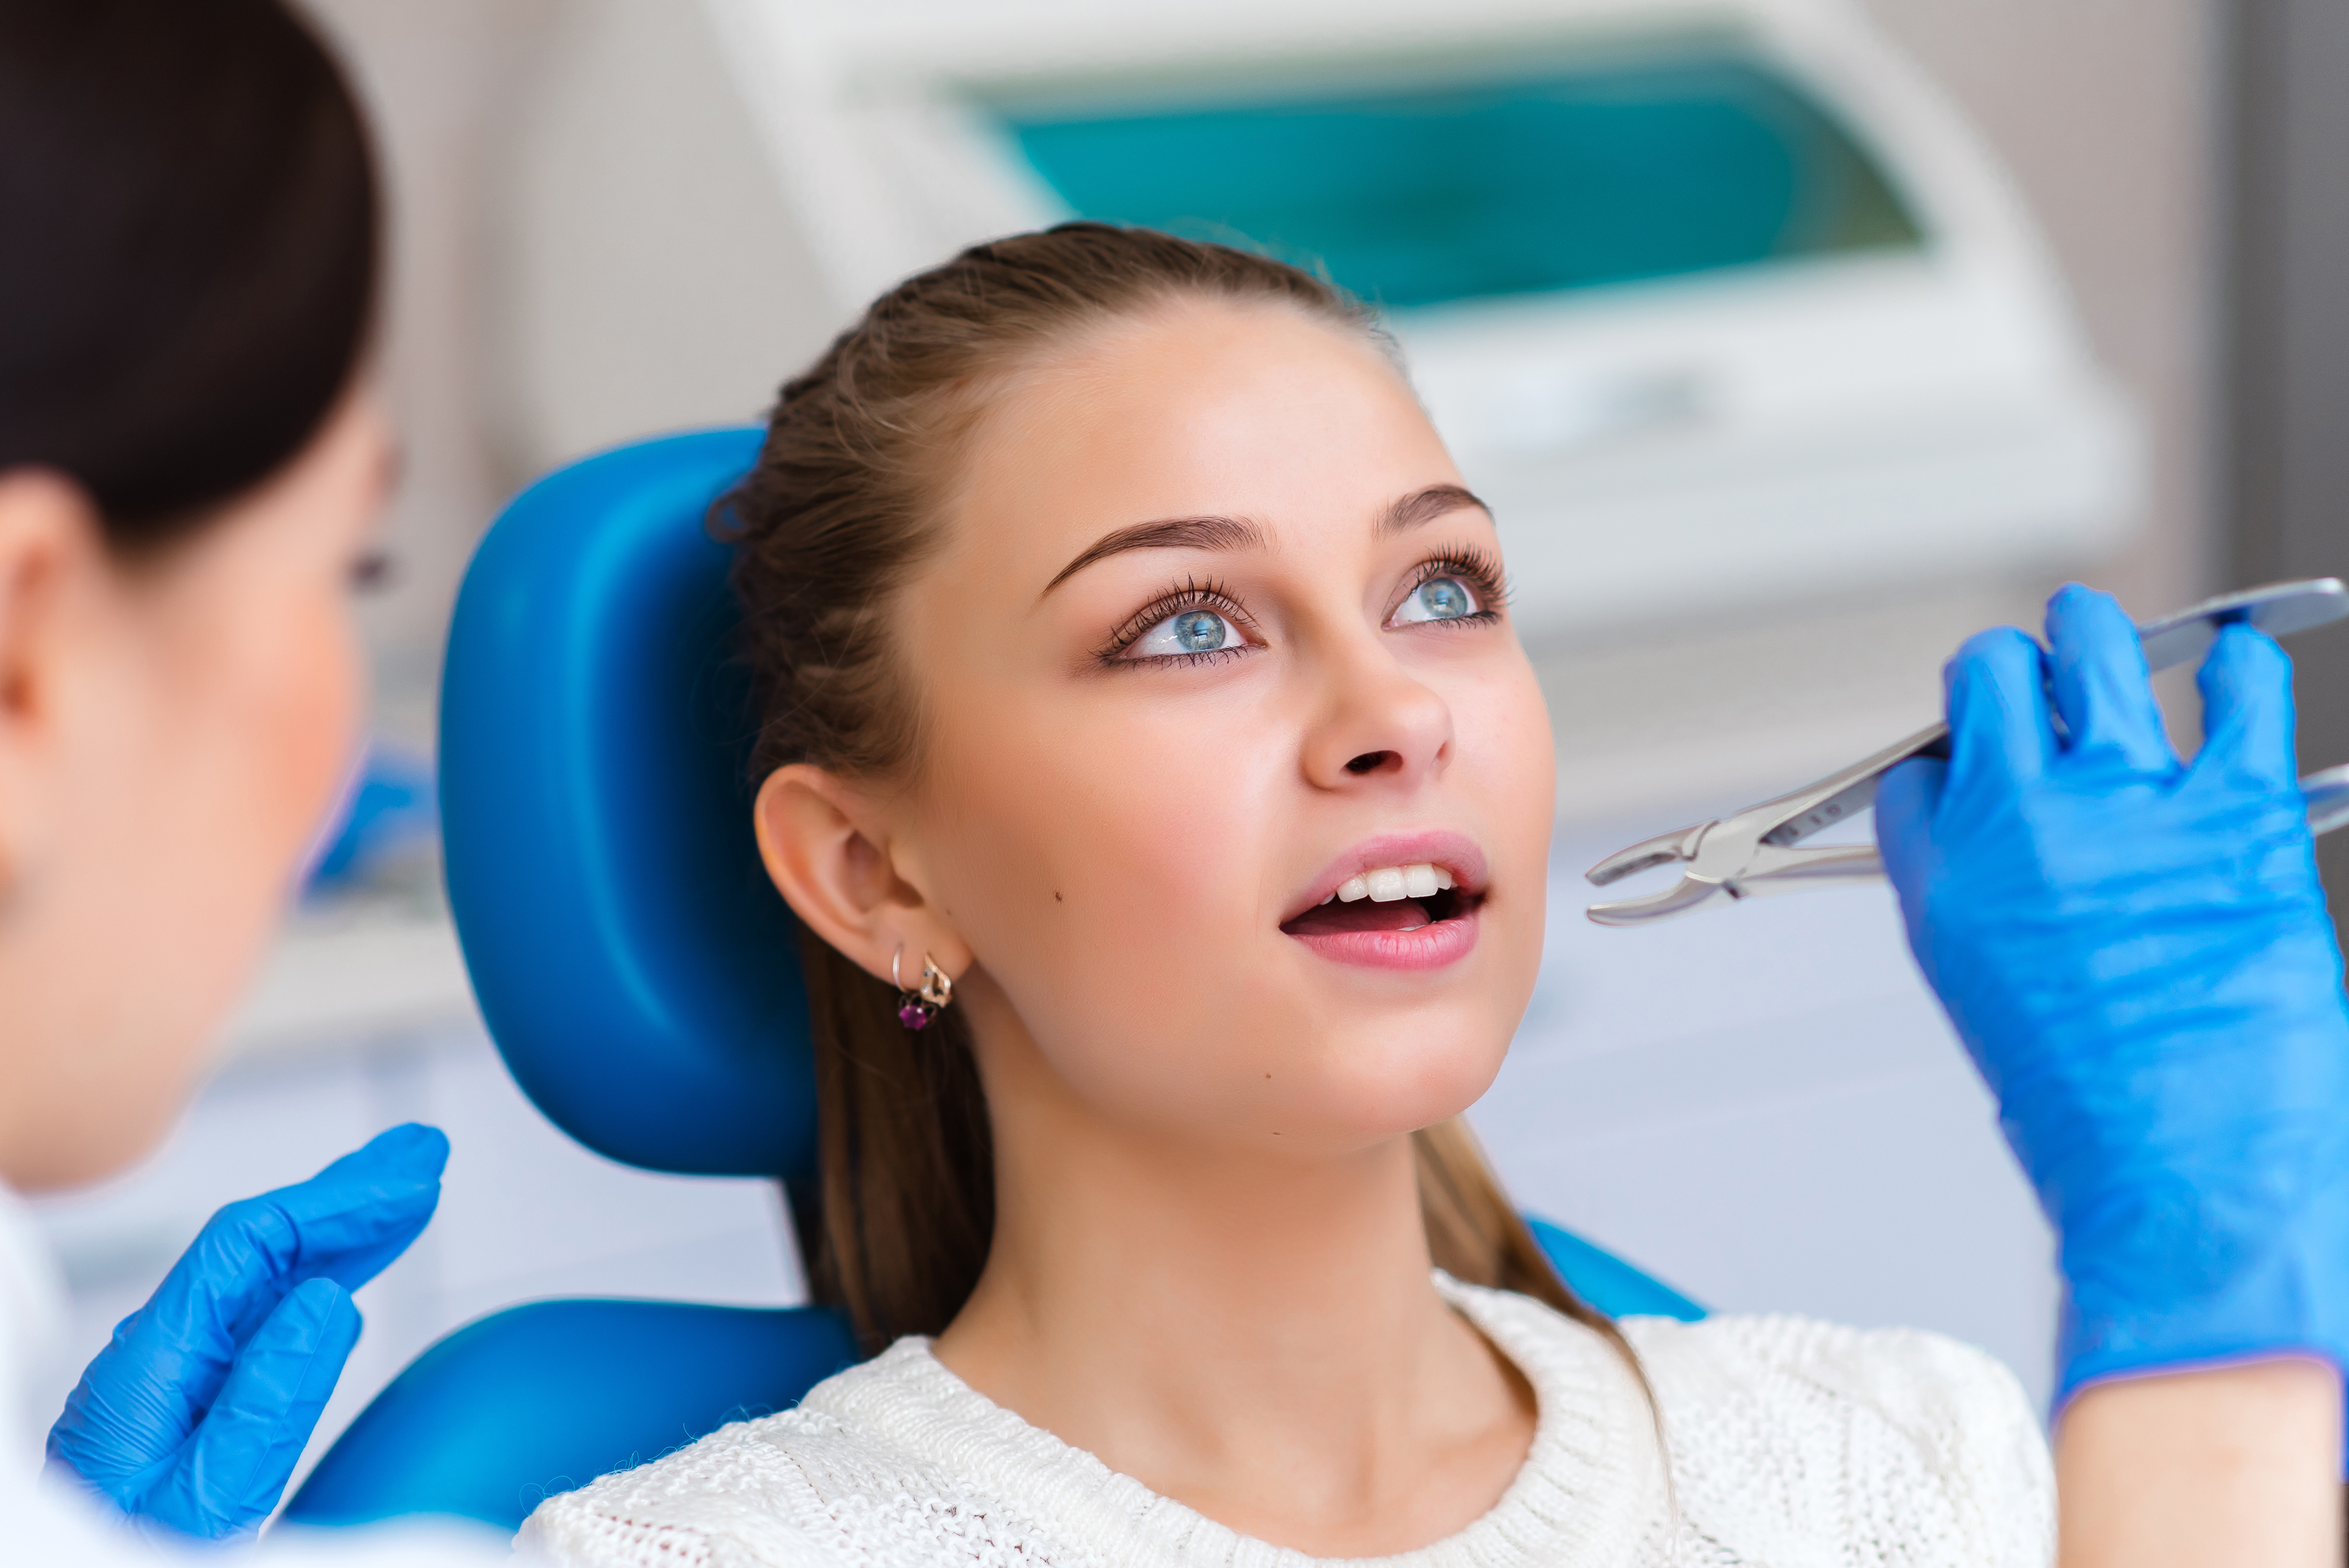 When Would A Dentist Recommend A Tooth Extraction?